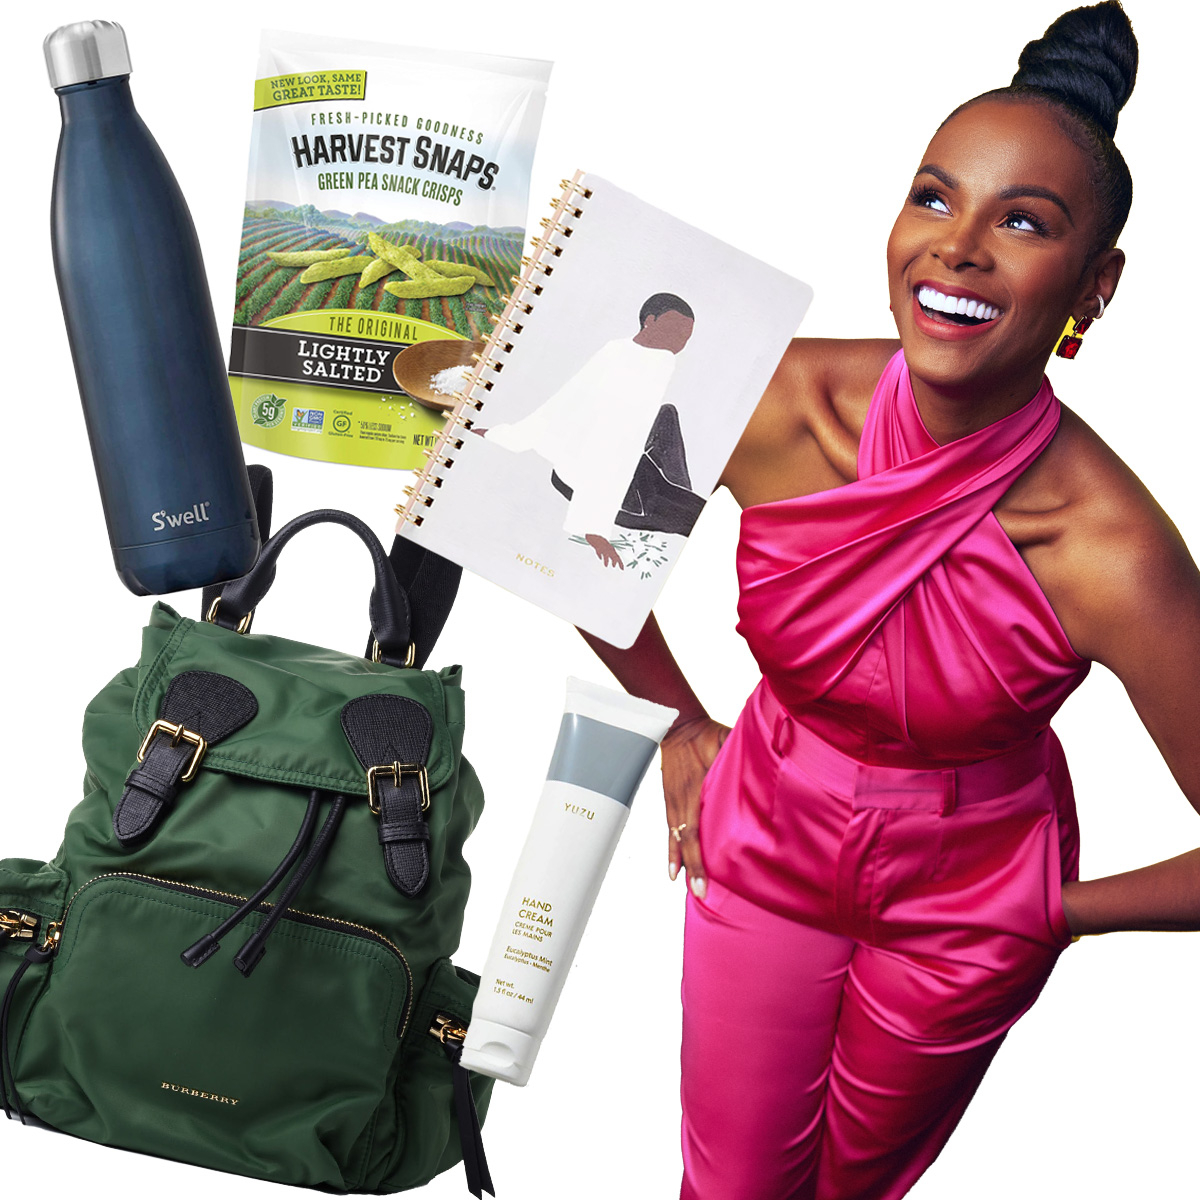 Tika Sumpter Always Has These Stress Relief Must-Haves in Her Bag